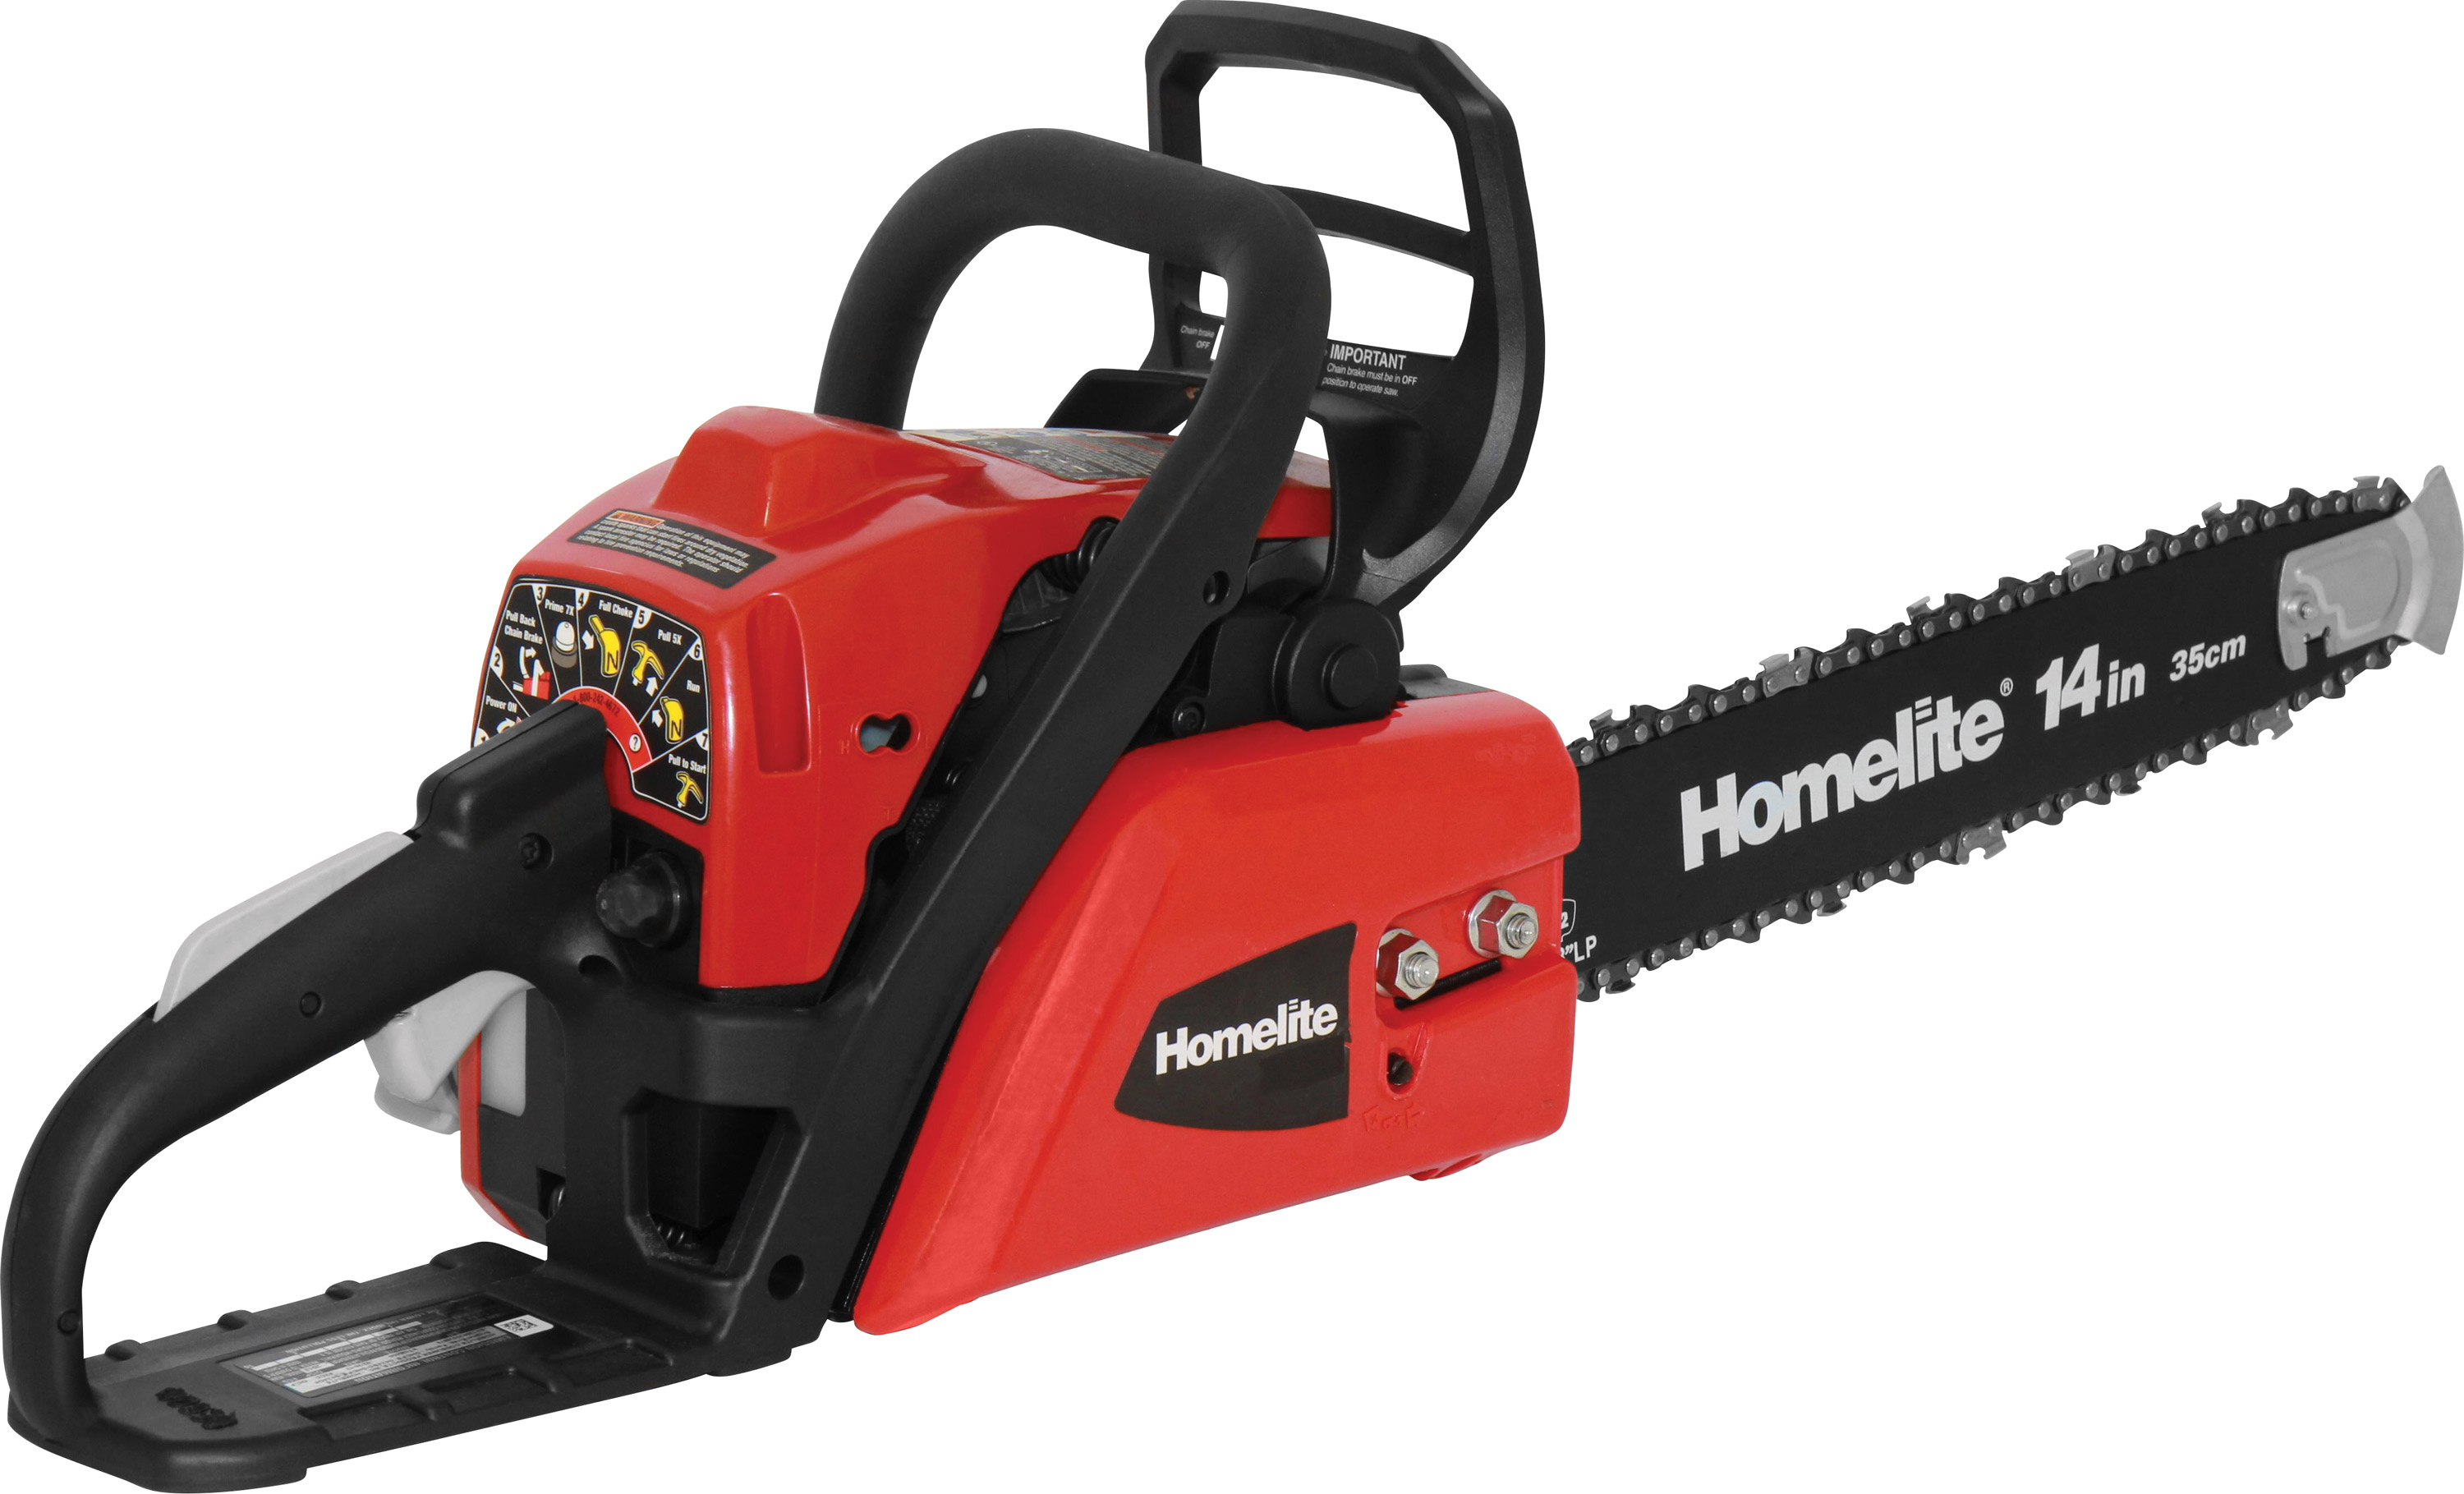 Homelite 14 in. 42 cc gasoline chainsaw (video review)